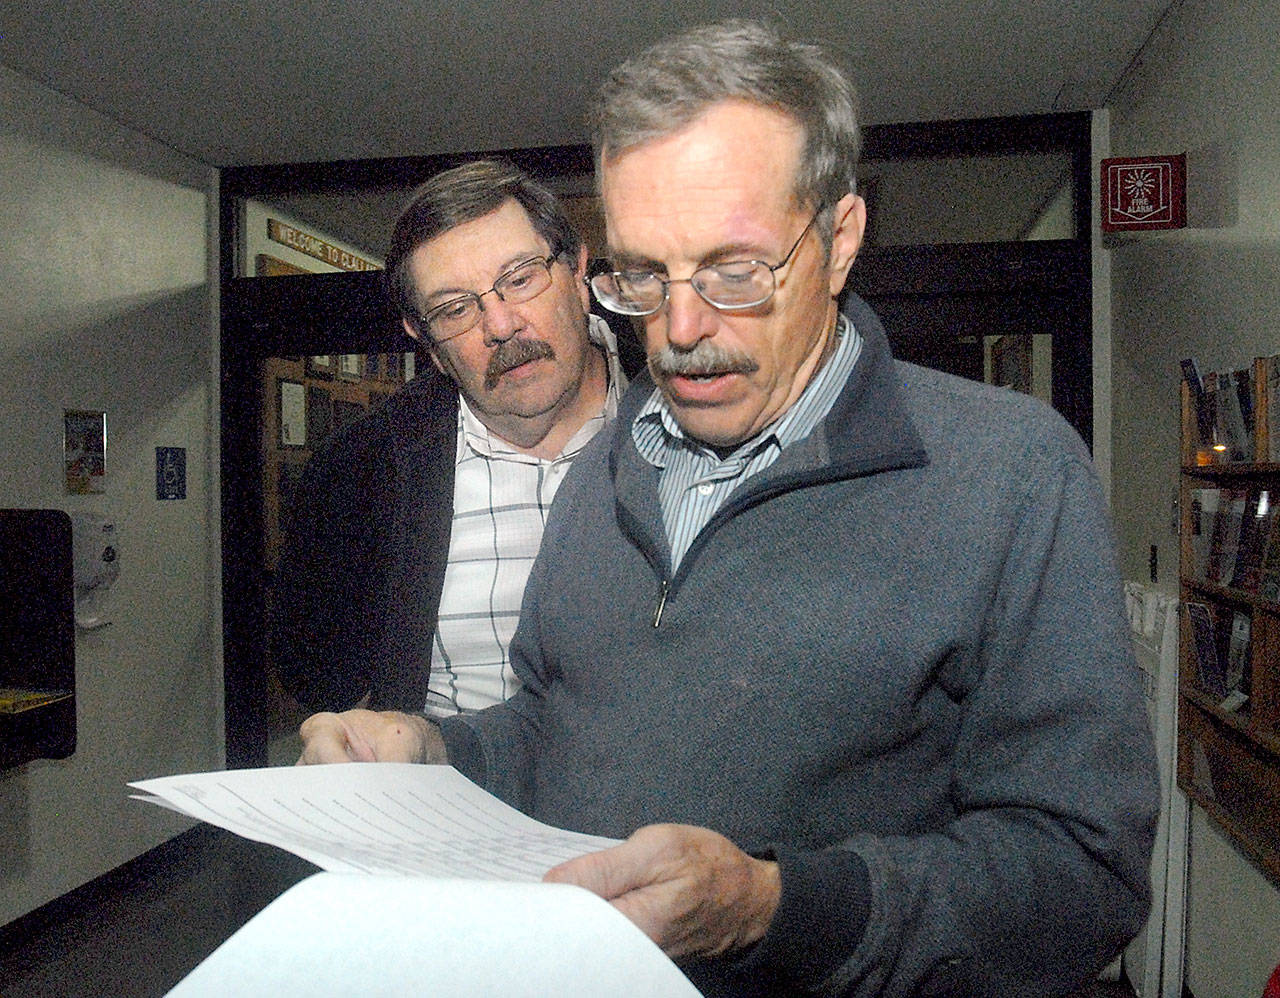 Clallam County Sheriff Bill Benedict looks at election returns as Undersheriff Ron Cameron looks over his shoulder at the Clallam County Courthouse on Tuesday night. (Keith Thorpe/Peninsula Daily News)